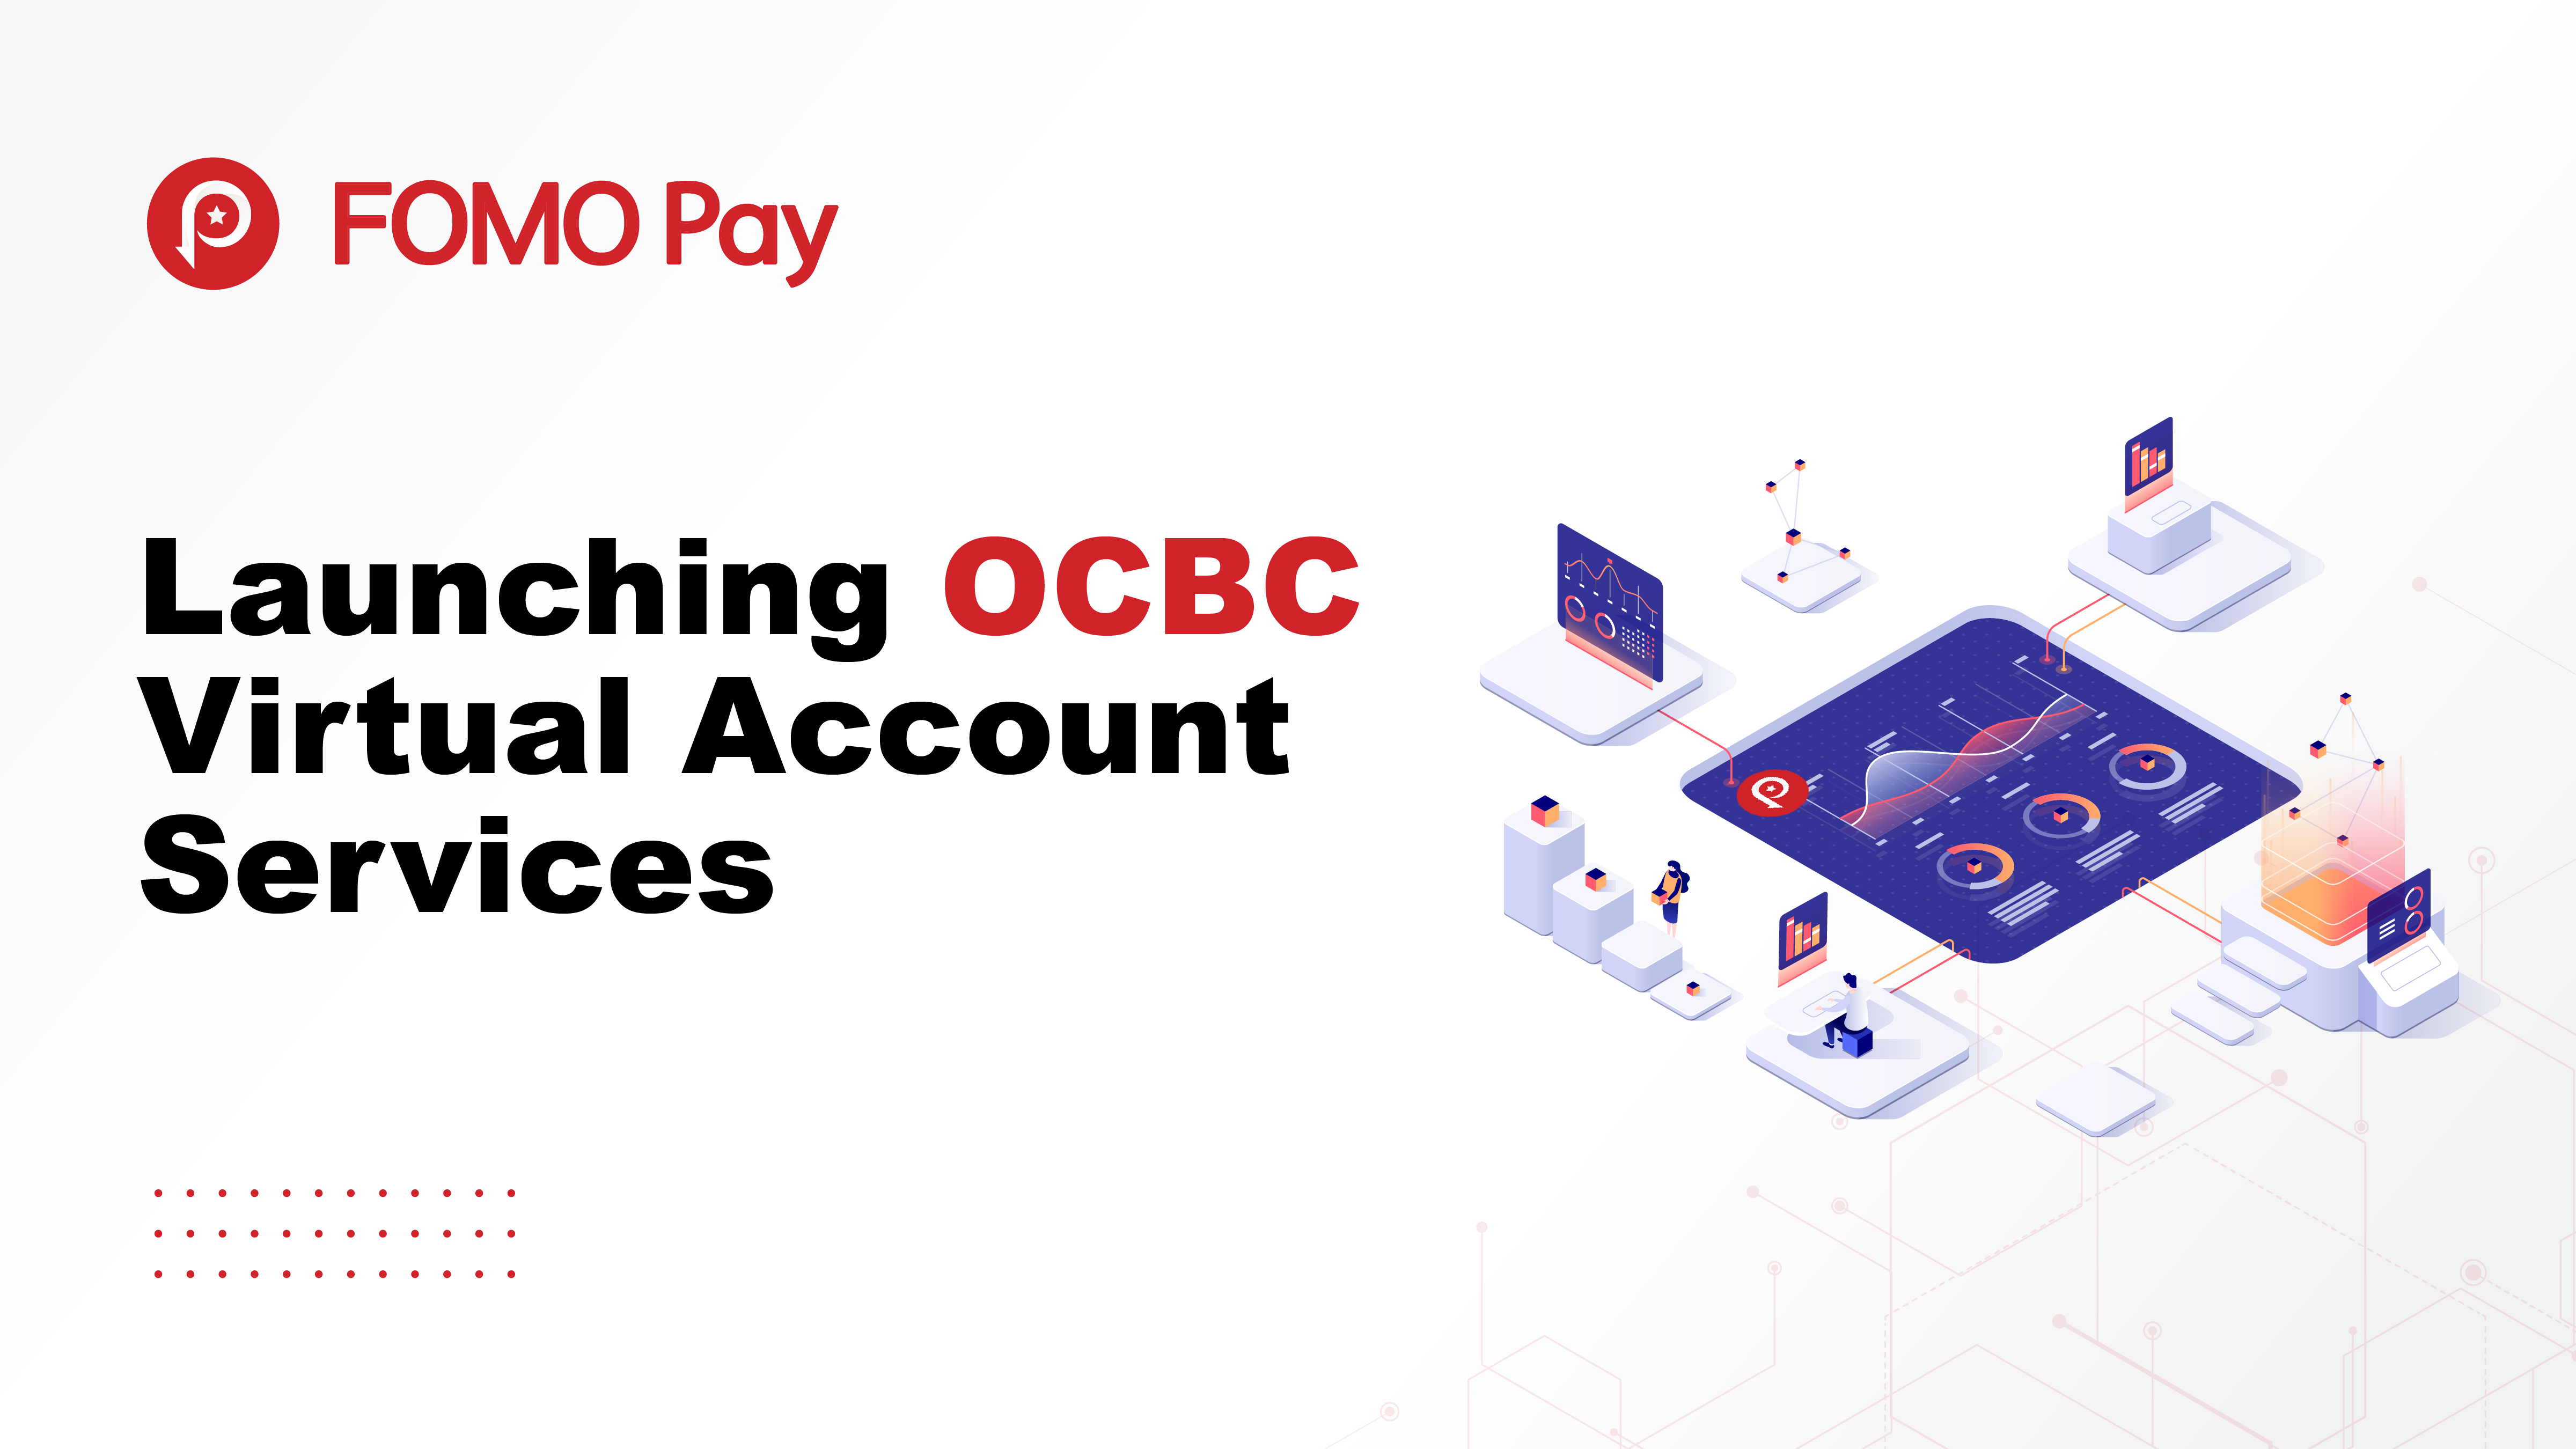 FOMO Pay launches OCBC virtual account services for merchants, corporates, and institutions